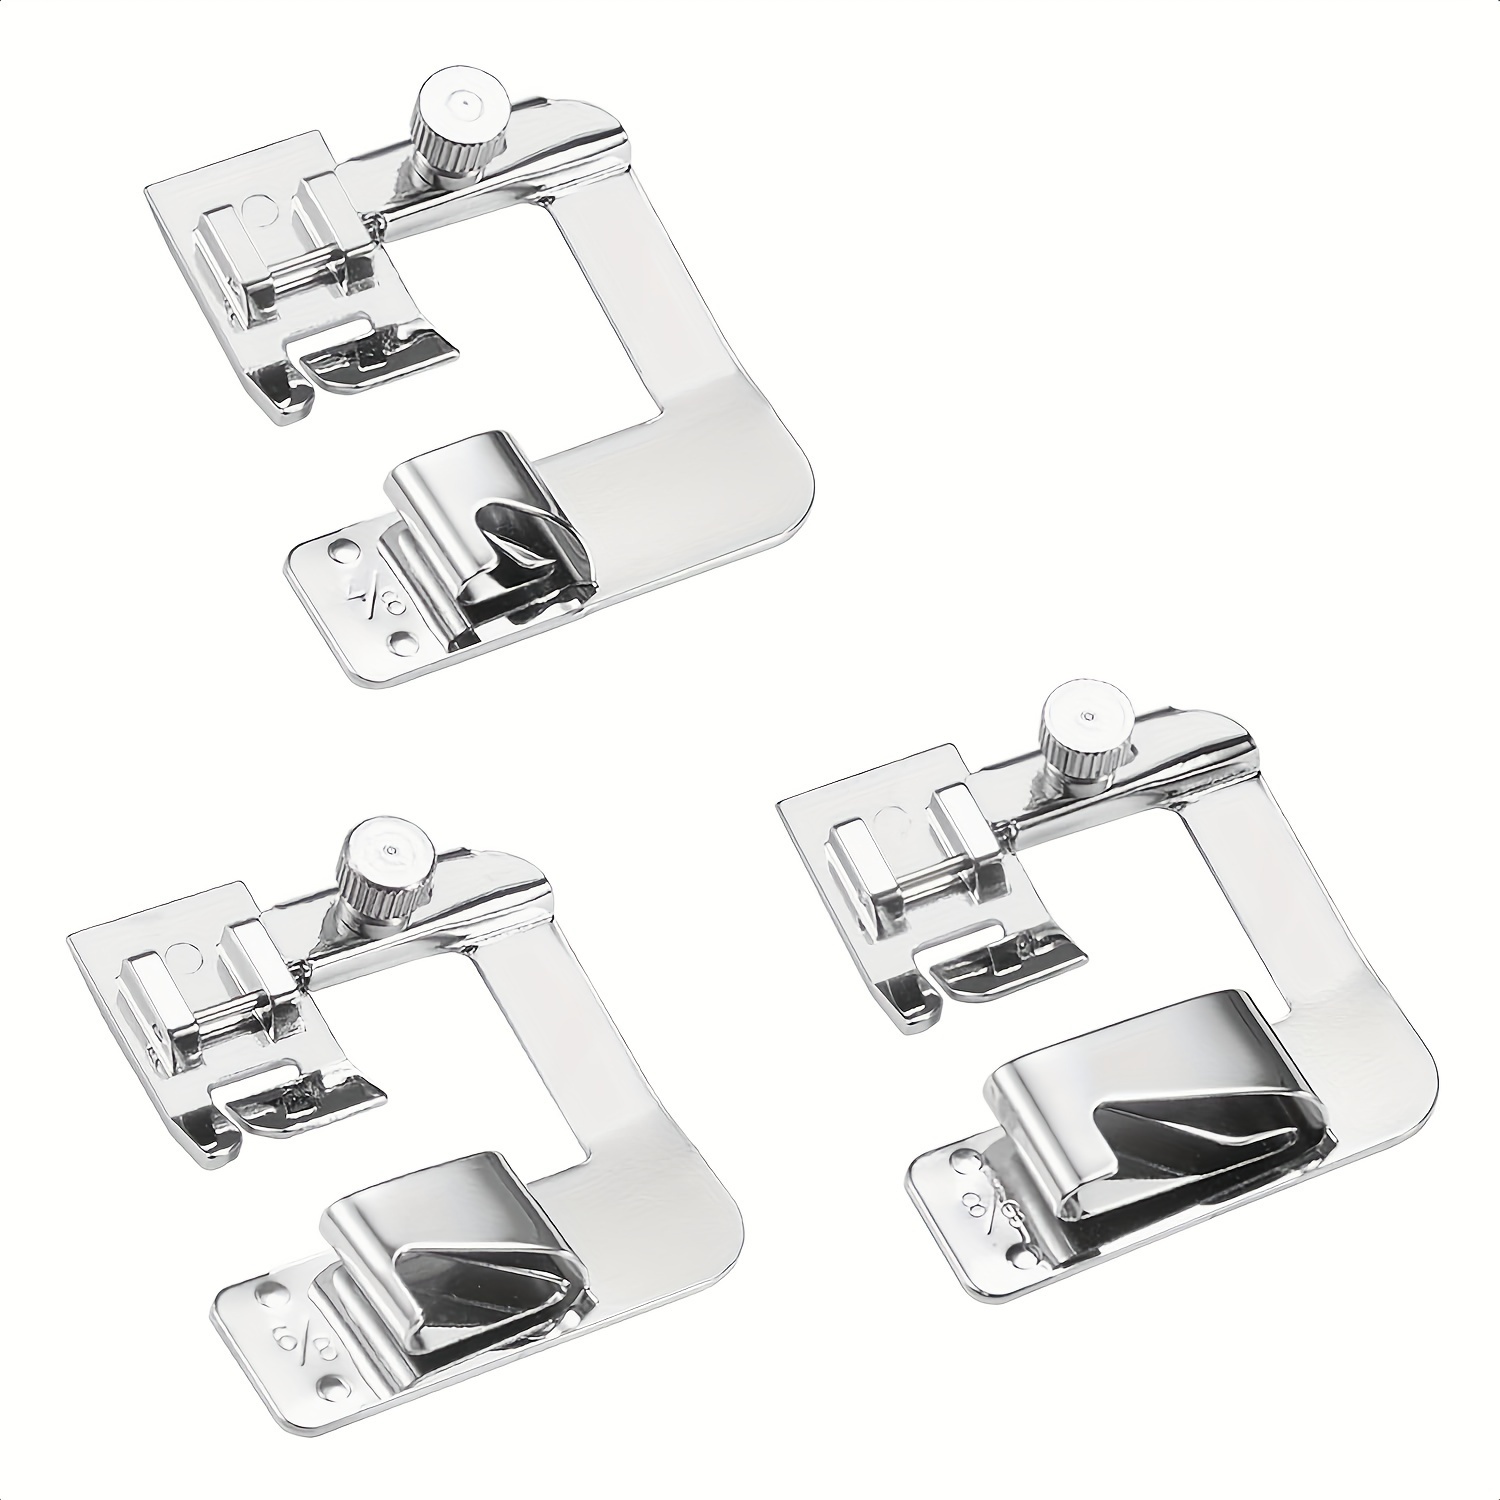 

3-piece Rolled Hem Presser Foot Set - Includes 1/2", 3/4", 1" Wide Feet For Singer, Brother, , & More - Easy Snap-on Attachment For Low Shank Sewing Machines